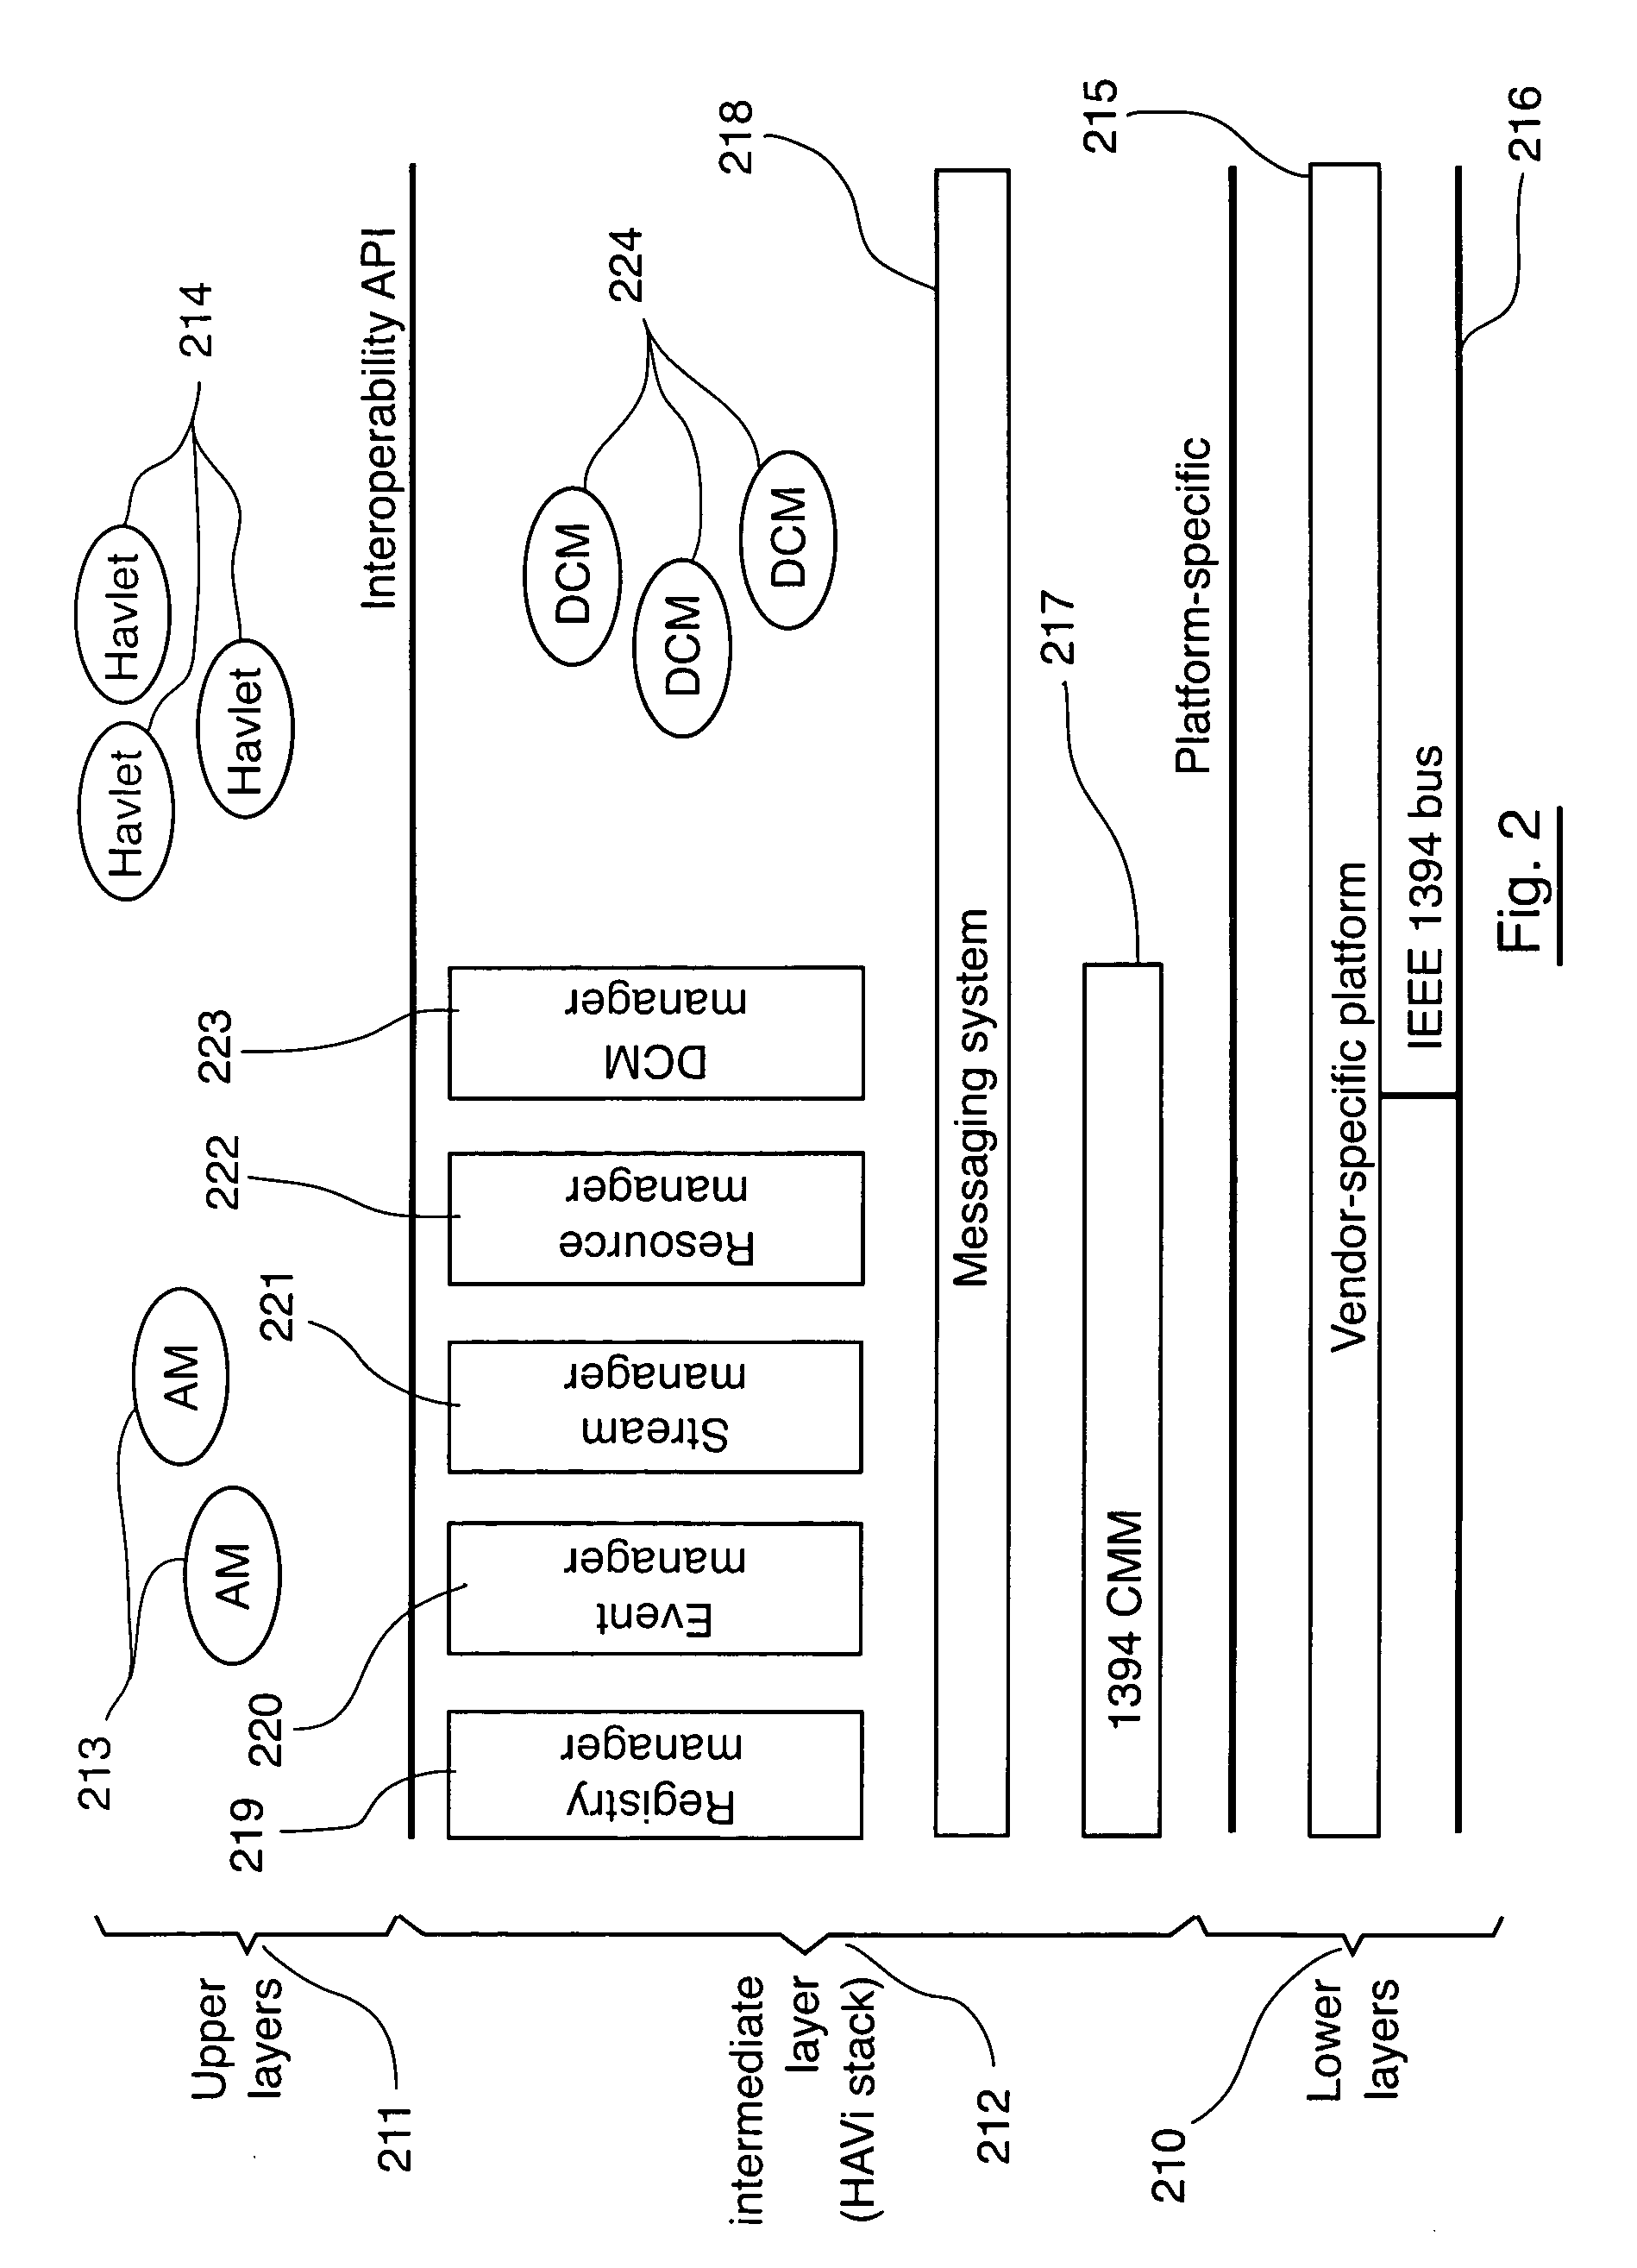 Gateway and method for the interconnection of two networks, especially a HAVi network and an UPnP network